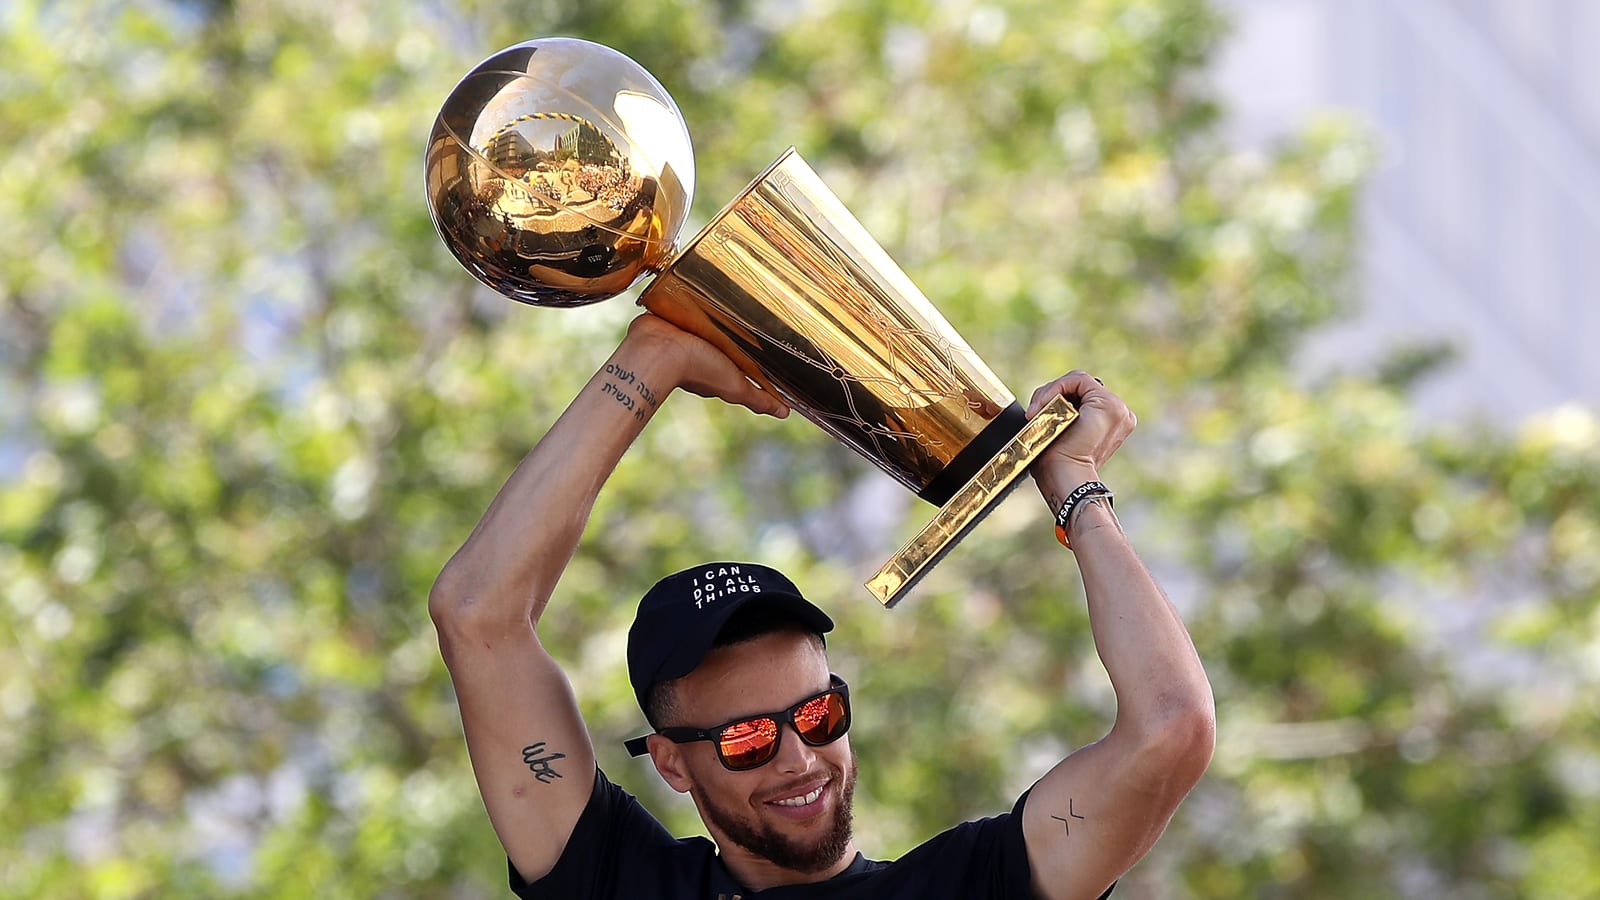 The 10 reasons why the Golden State Warriors will repeat as champions